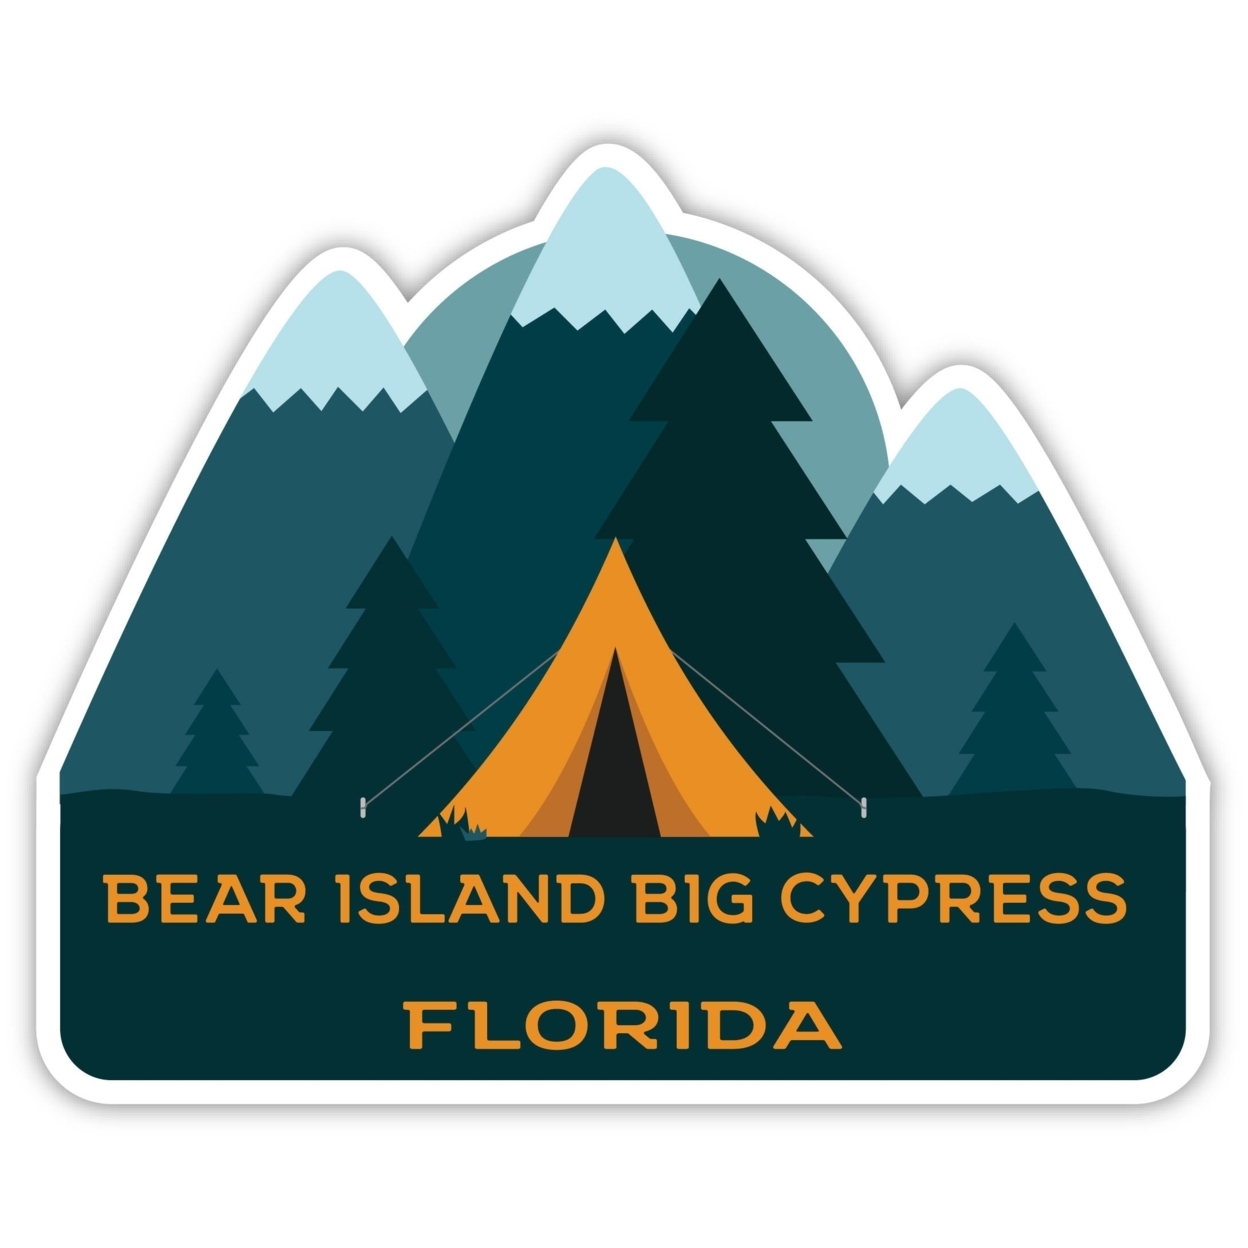 Bear Island Big Cypress Florida Souvenir Decorative Stickers (Choose Theme And Size) - 4-Pack, 6-Inch, Tent